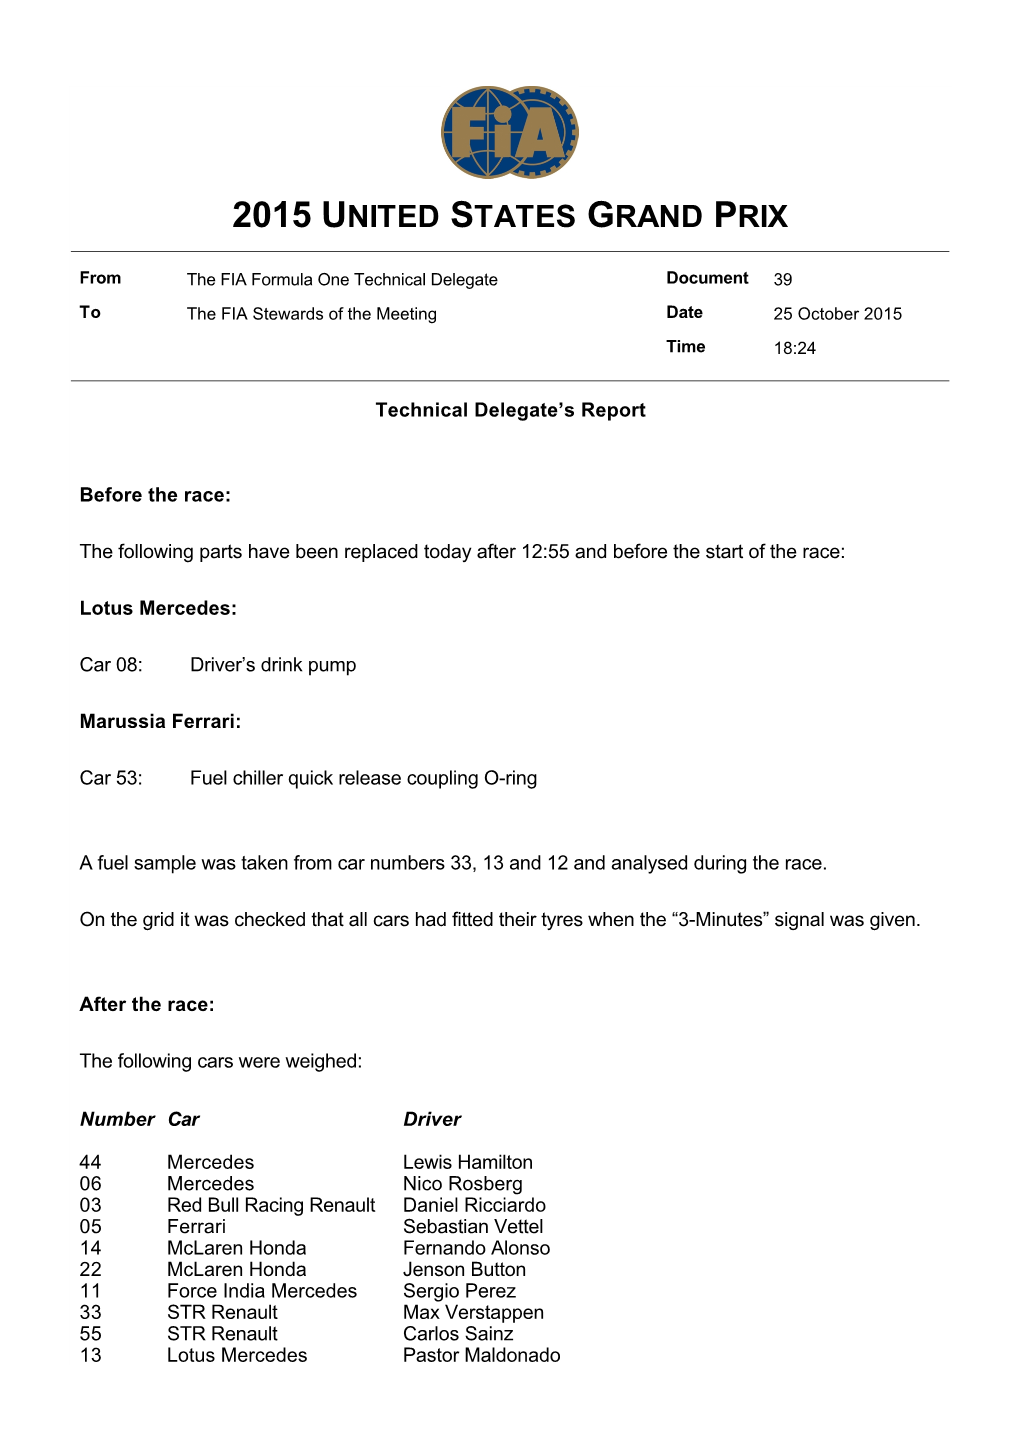 Document 39 to the FIA Stewards of the Meeting Date 25 October 2015 Time 18:24